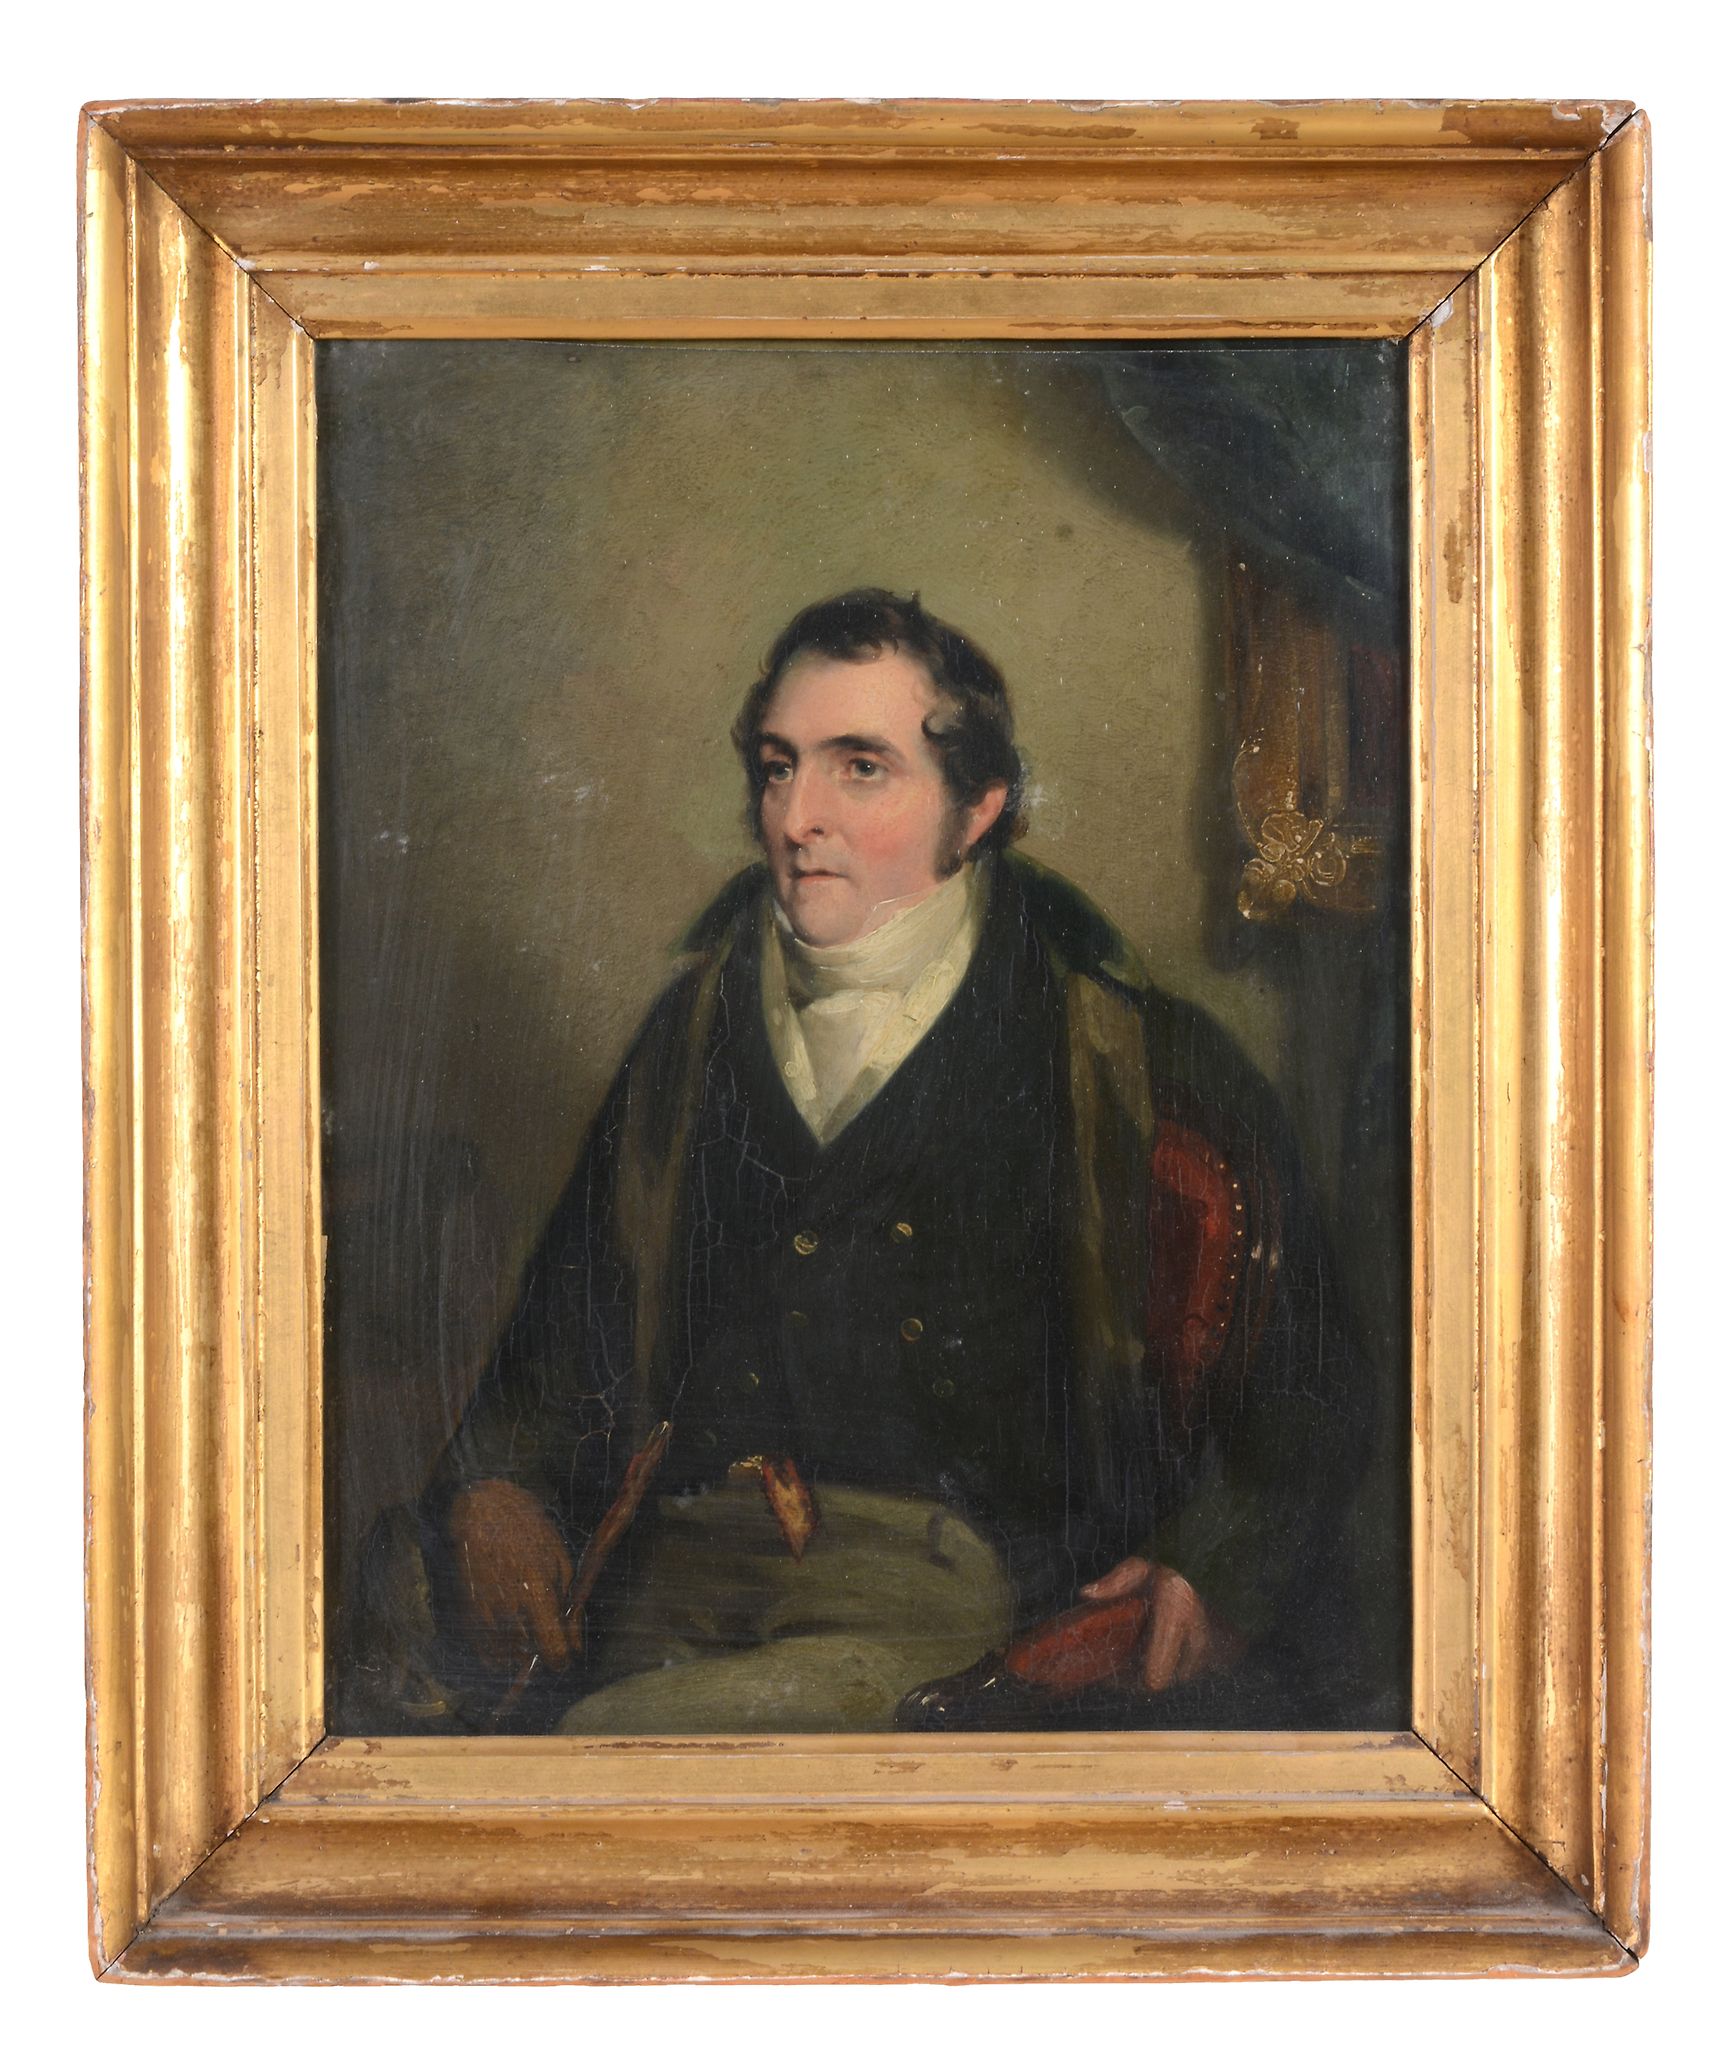 Circle of Henry Raeburn (1756-1823) - Portrait of a seated gentleman in an interior Oil on panel - Image 2 of 3